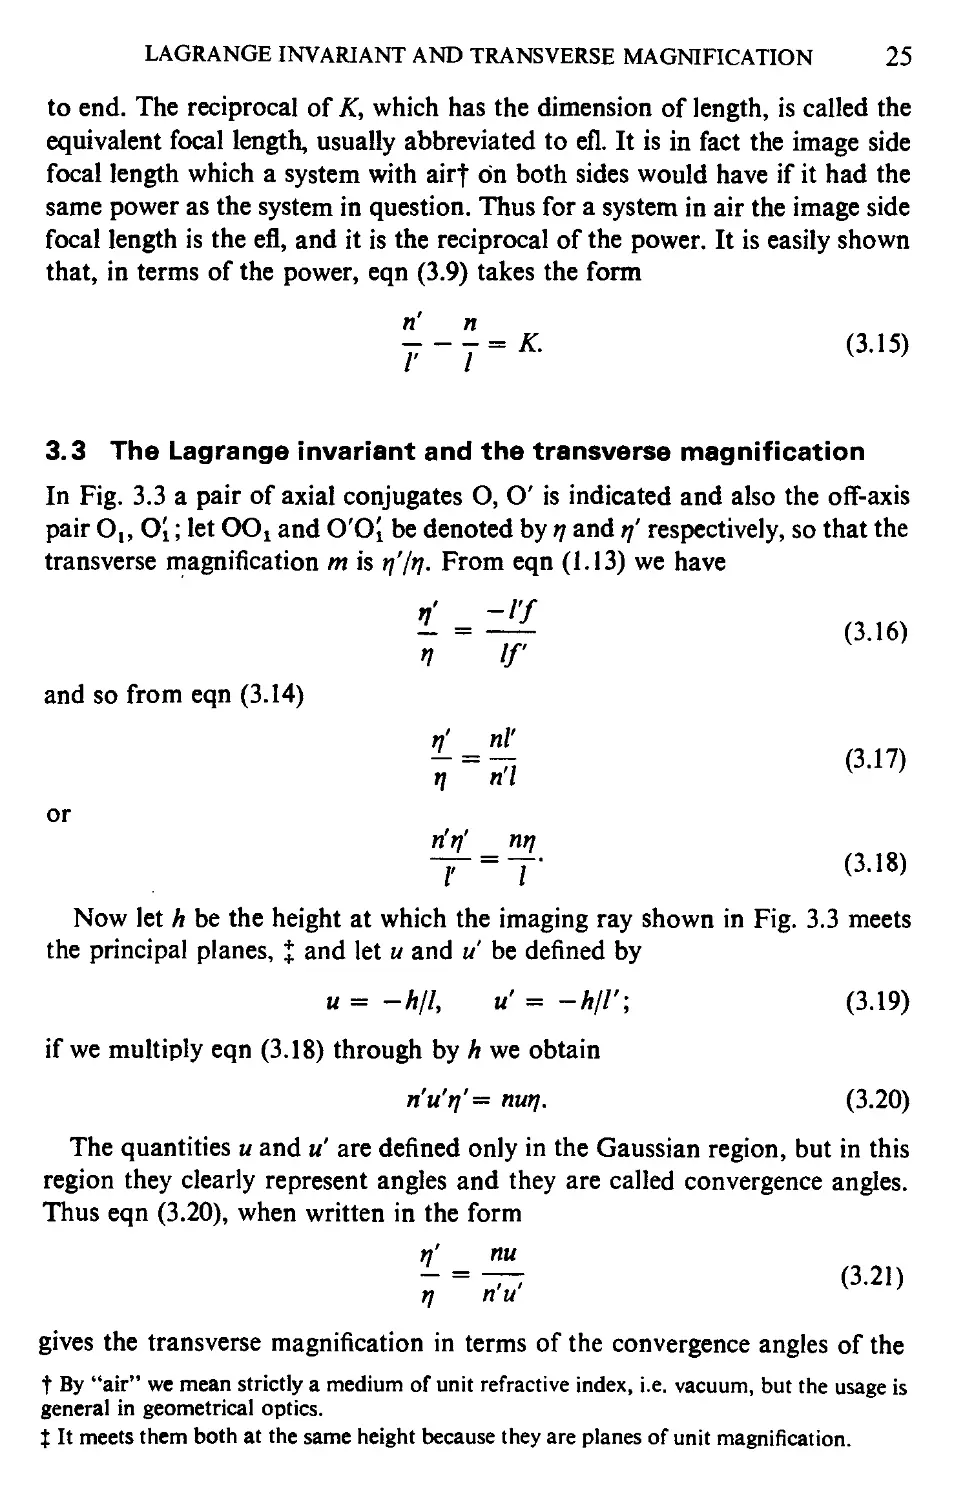 3.3 The Lagrange invariant and the transverse magnification